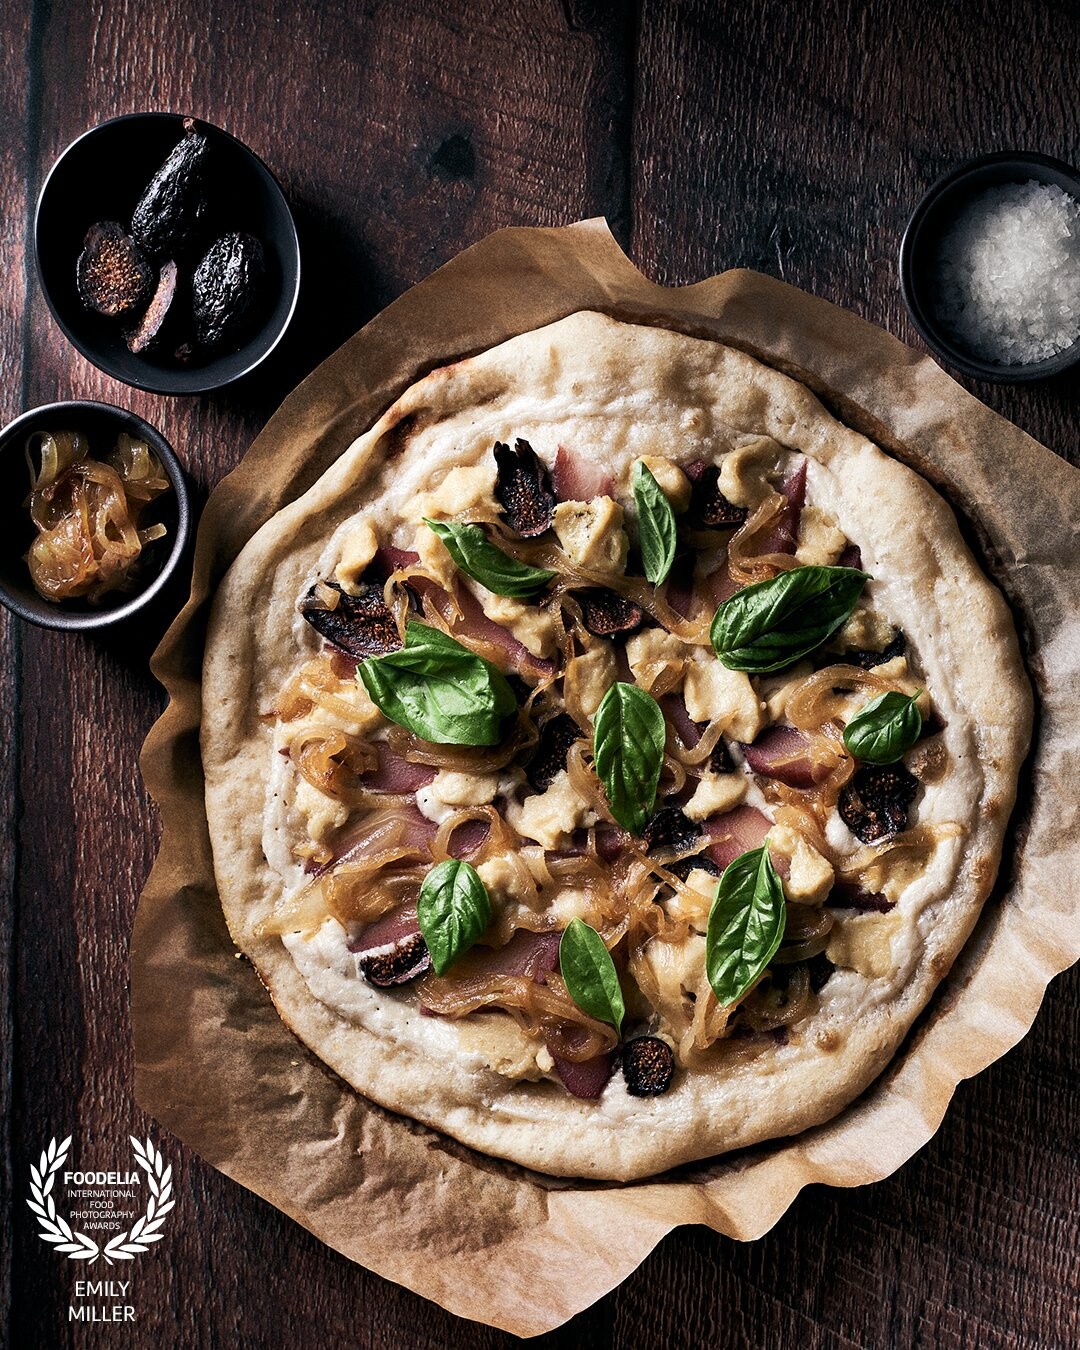 Homemade pizza with cashew cream, topped with red wine poached pears, vegan blue cheese, dried Mission figs, and caramelized onion. Topped with fresh basil from our garden. Quite possibly the best pizza I have ever made.  Lighting:  strip softbox at 11:00. Settings: Nikon D810, 50mm/1.8, ISO 100, 1/160 sec, f/6.3.